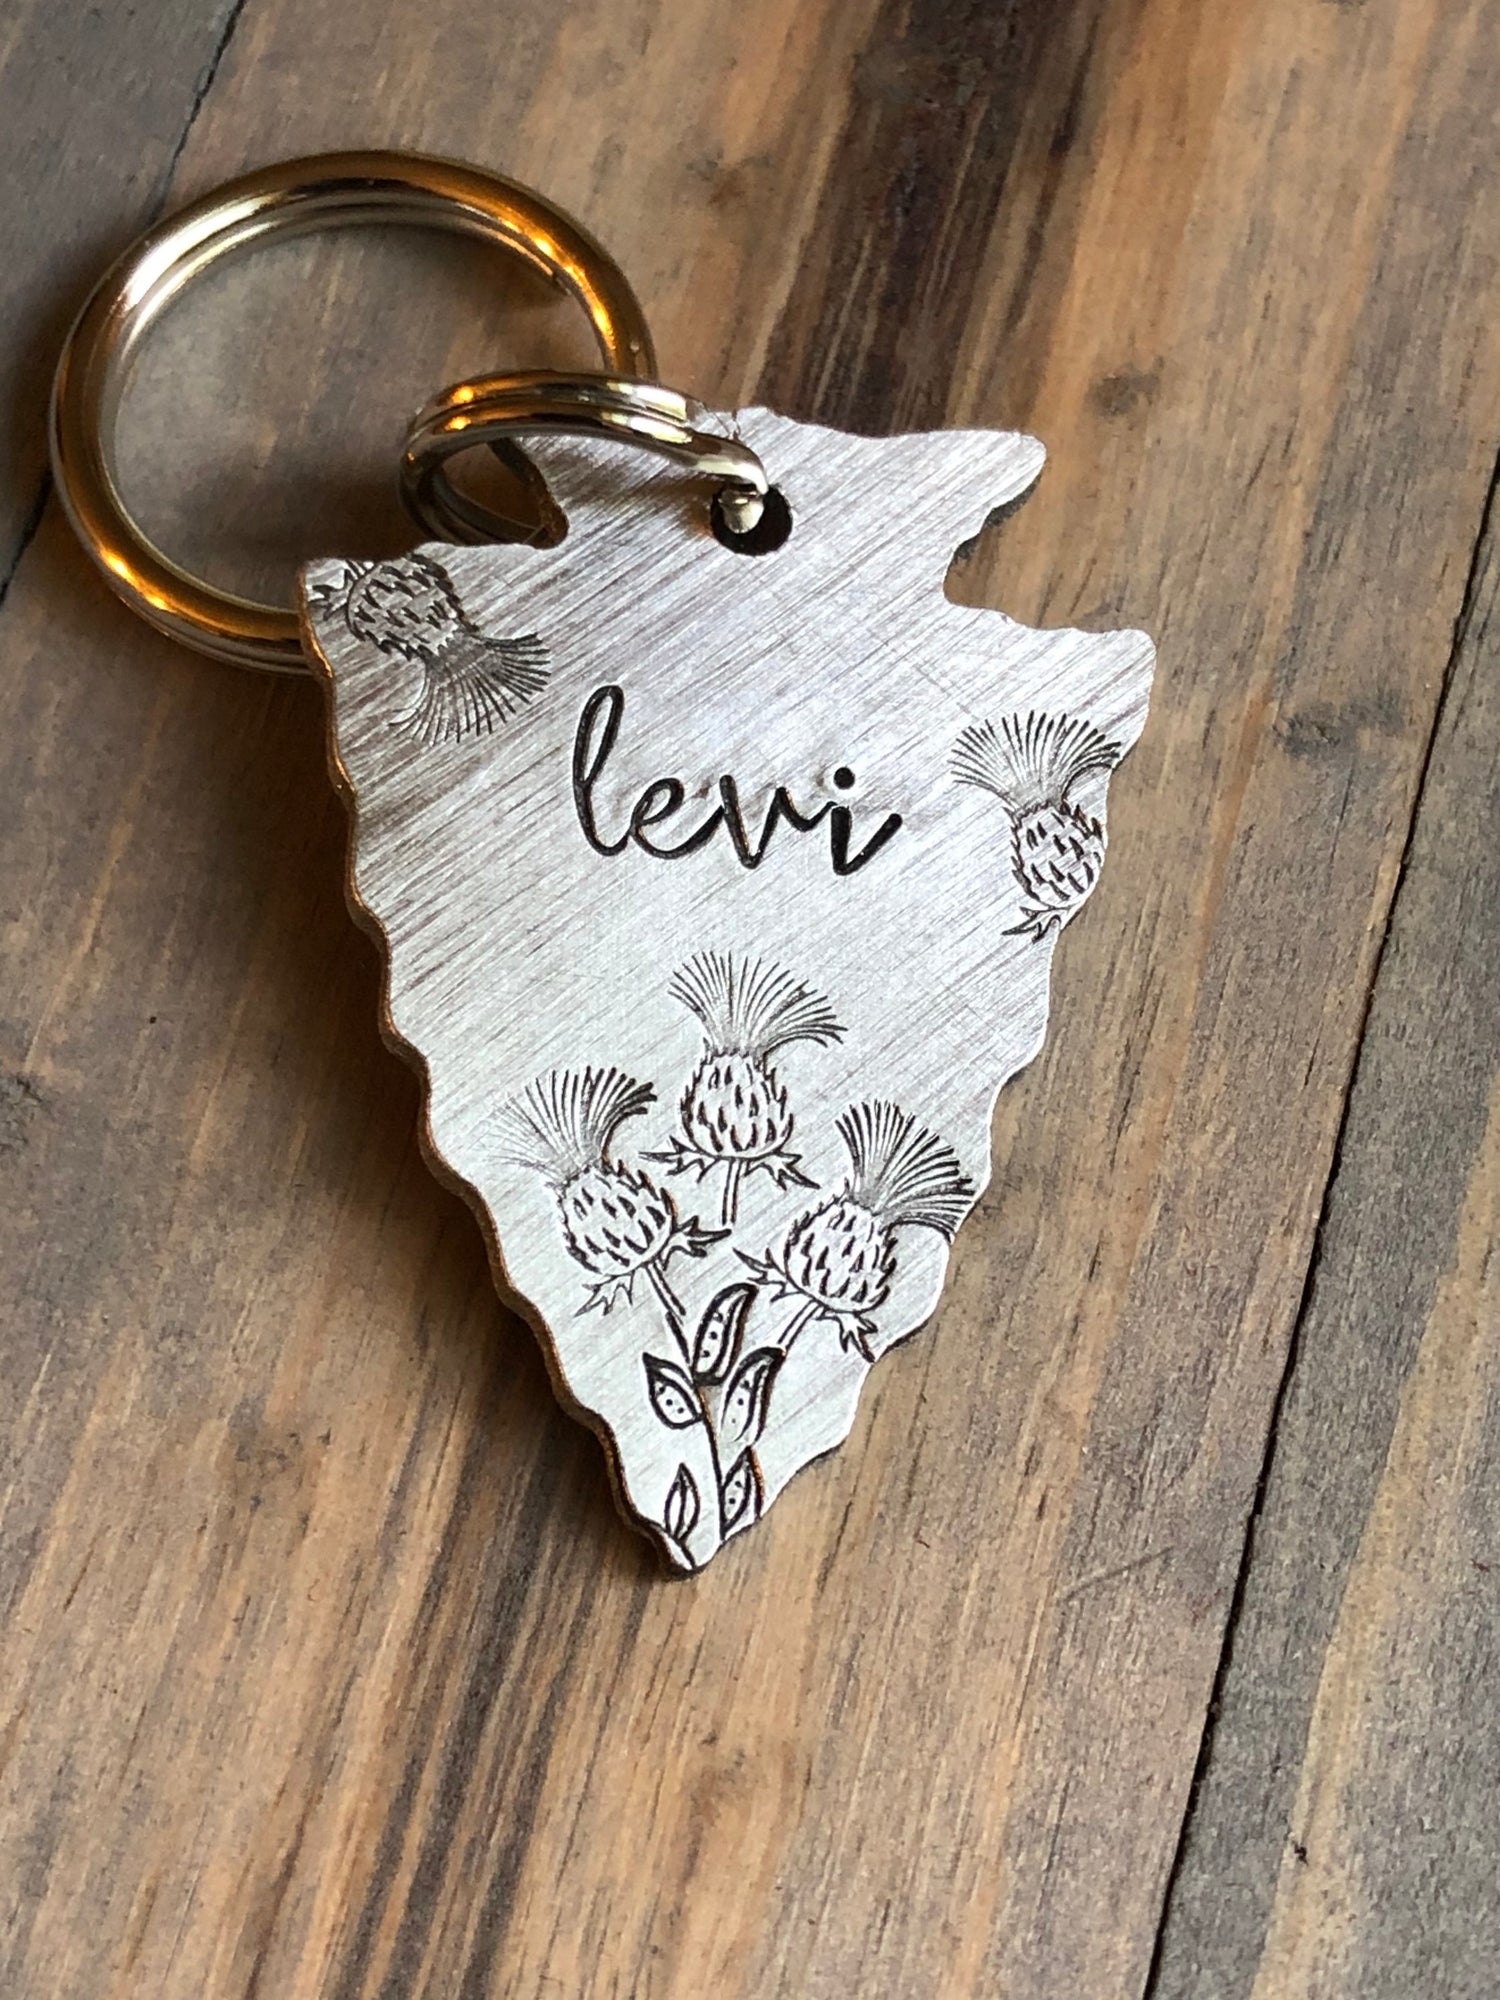 Custom Arrowhead Dog Tag with Thistle, Hand Stamped Pet ID, Personalized Dog Tag for Dog, Arrowhead Dog Tag, Scottish Thistle with Bee